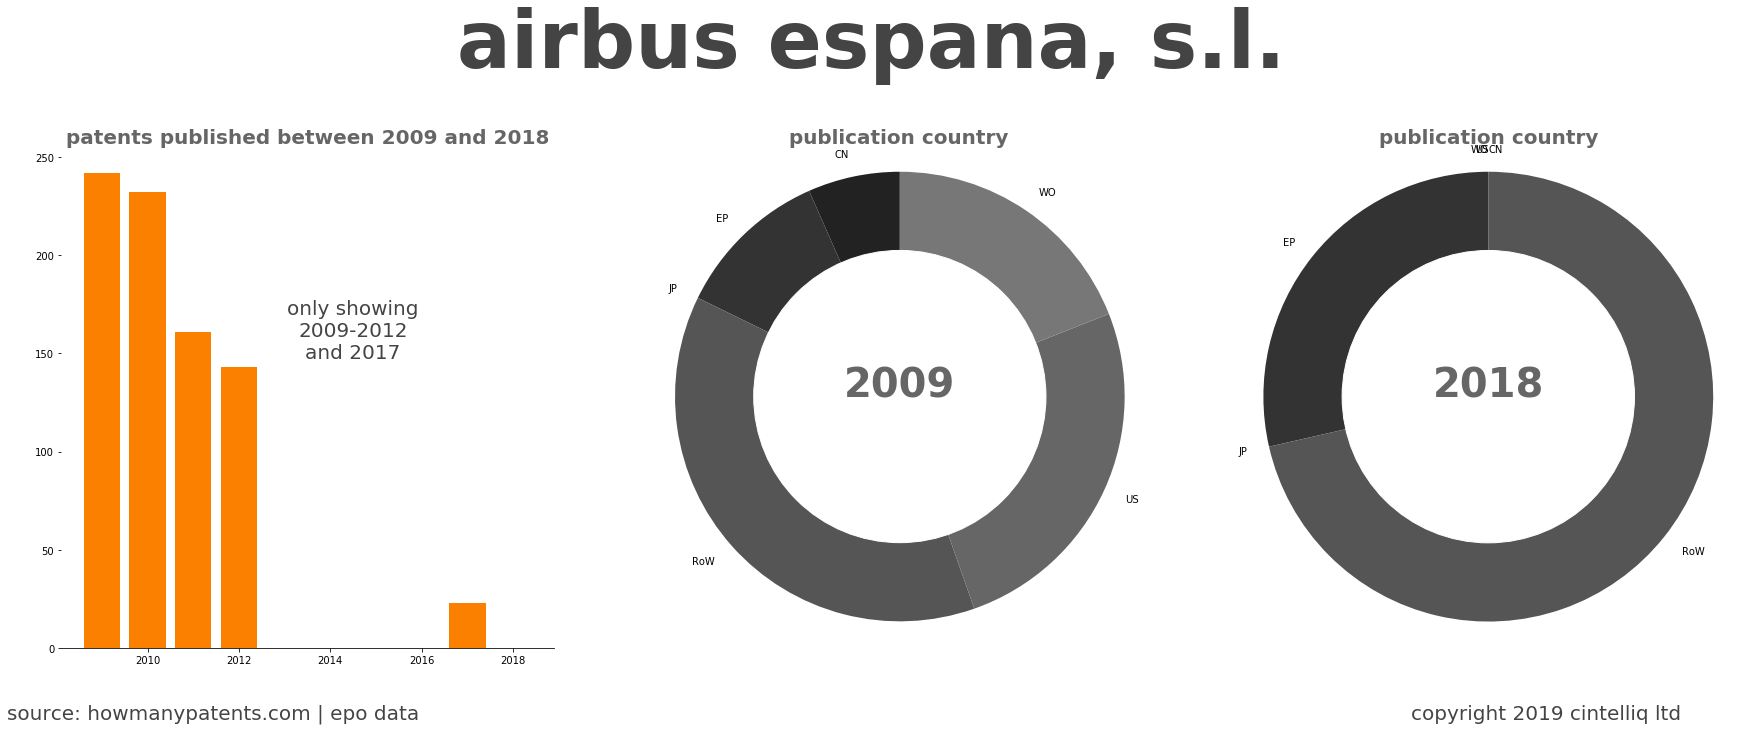 summary of patents for Airbus Espana, S.L.